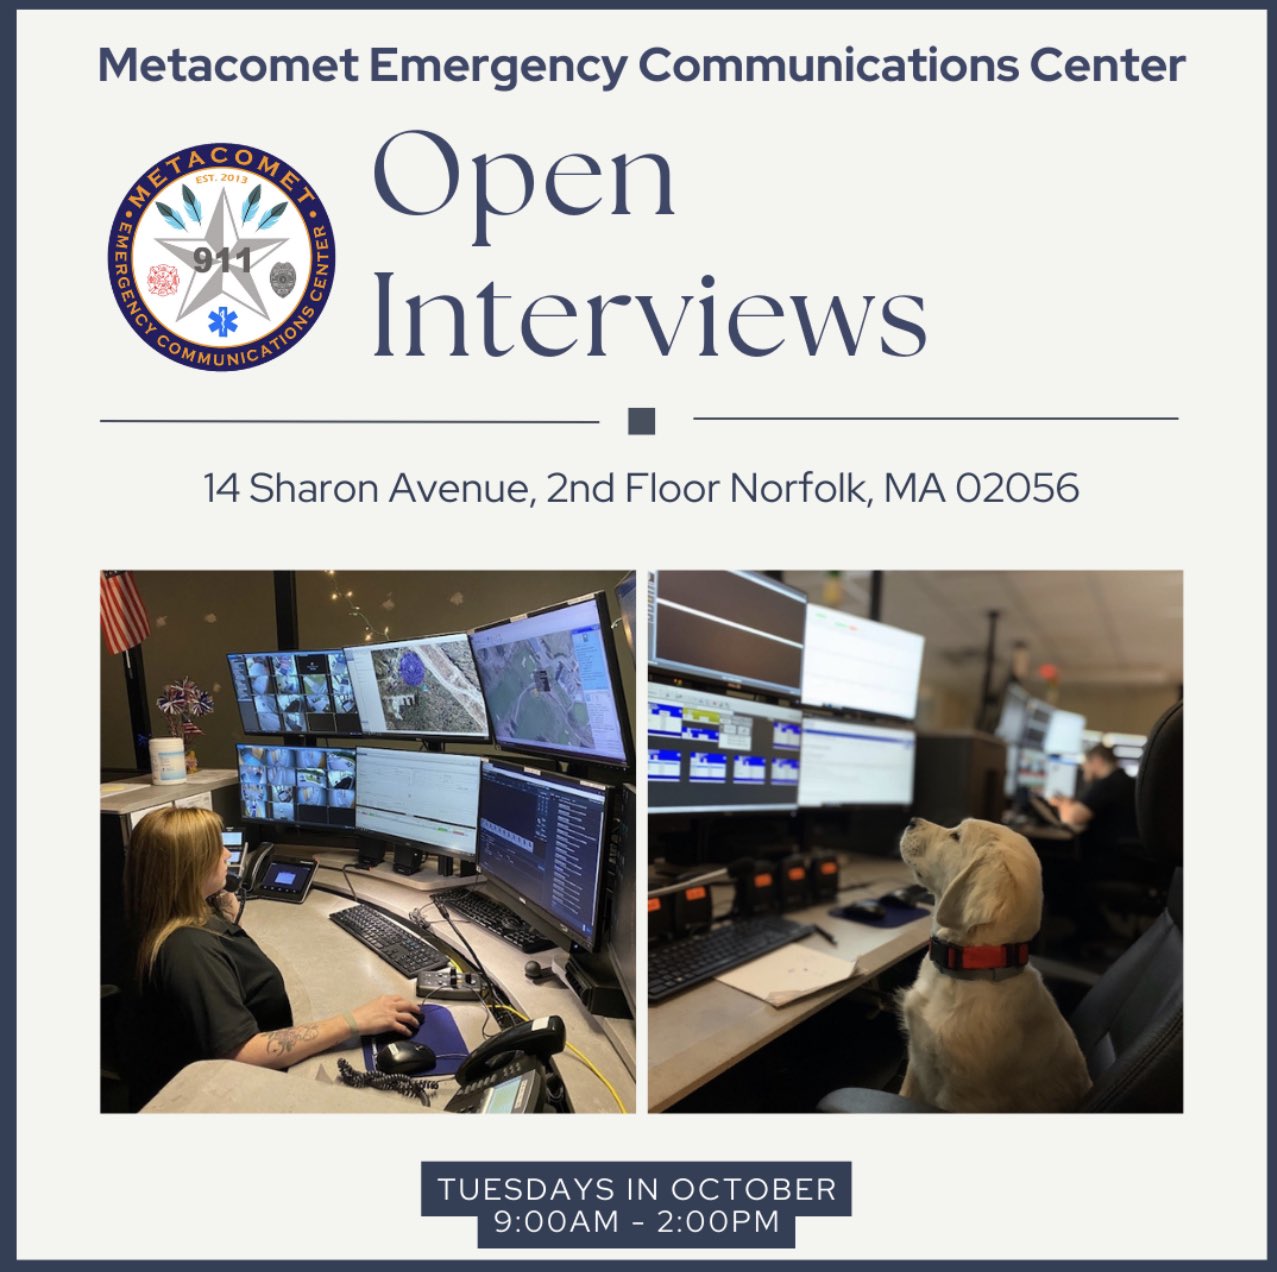 The Metacomet Emergency Communications Center (MECC) is hiring